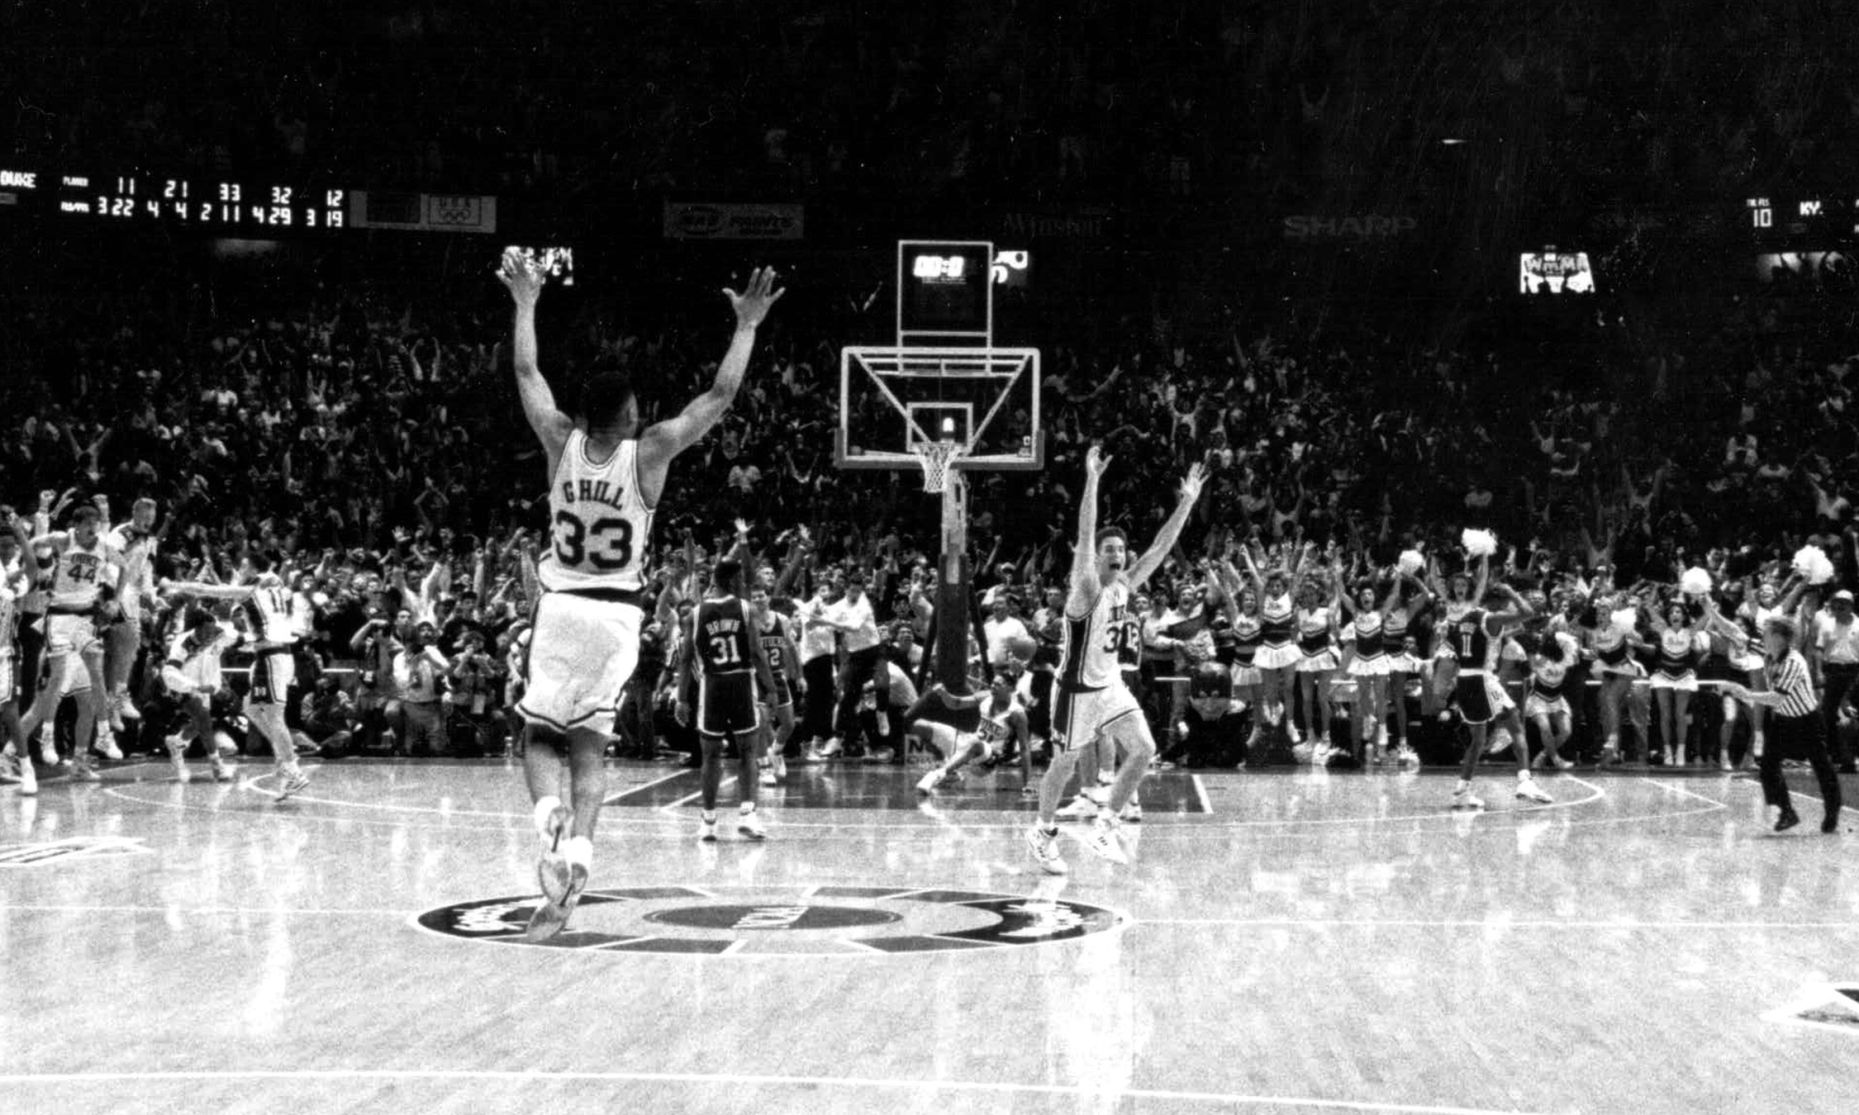 Classic NCAA basketball games – including The Shot